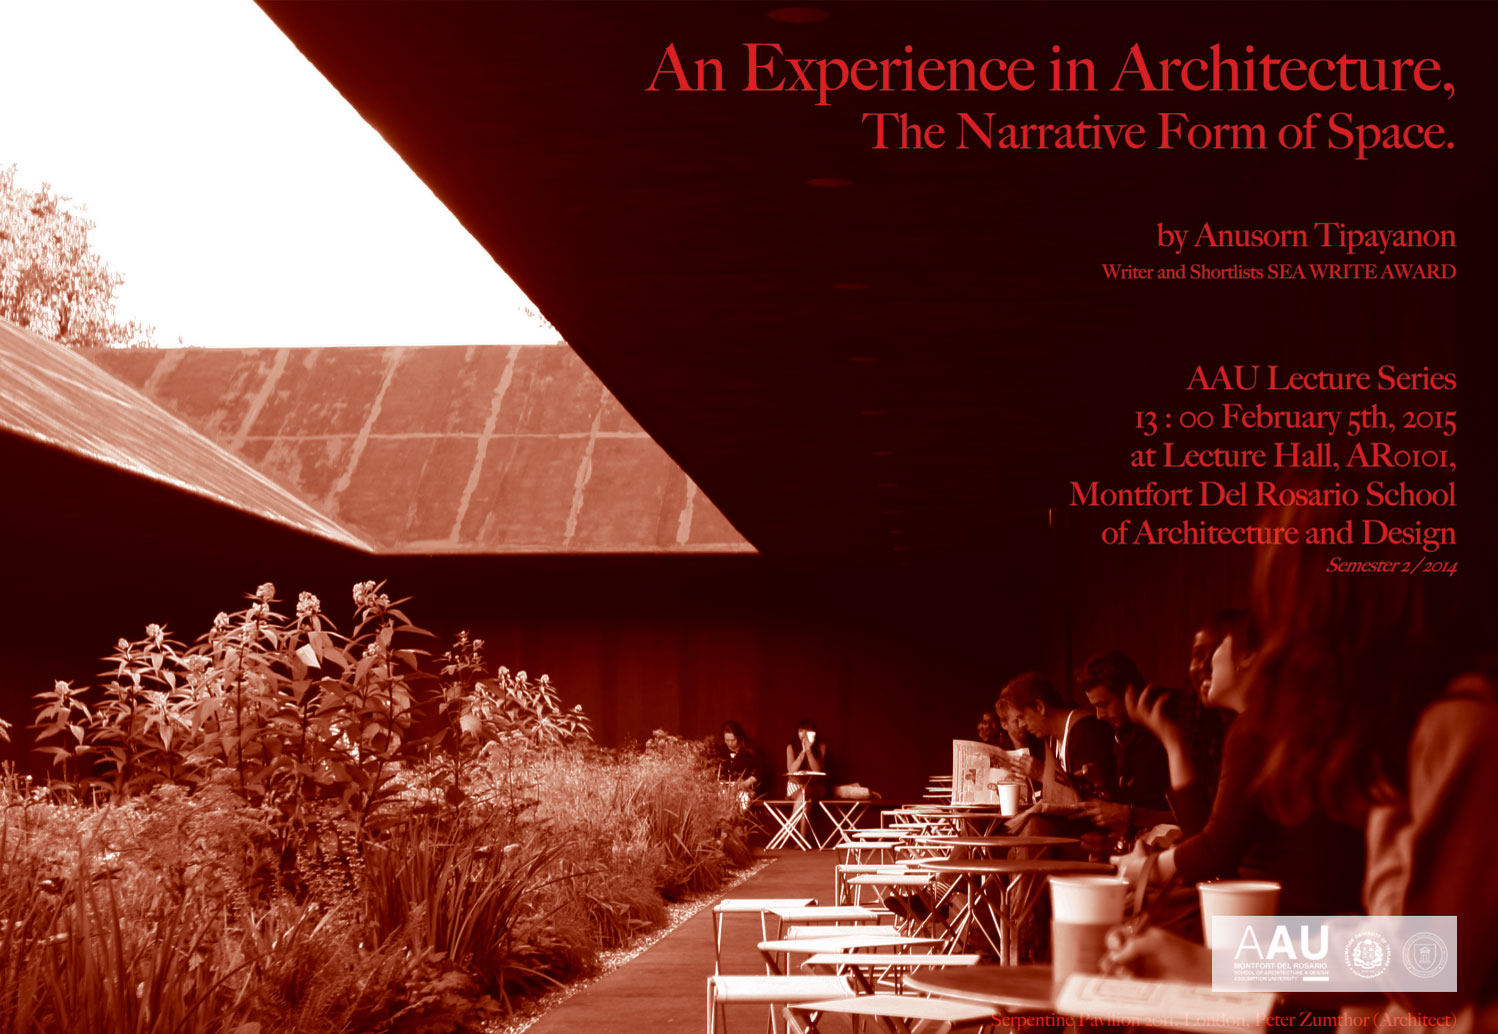 Lecture Series: An Experience in Architecture